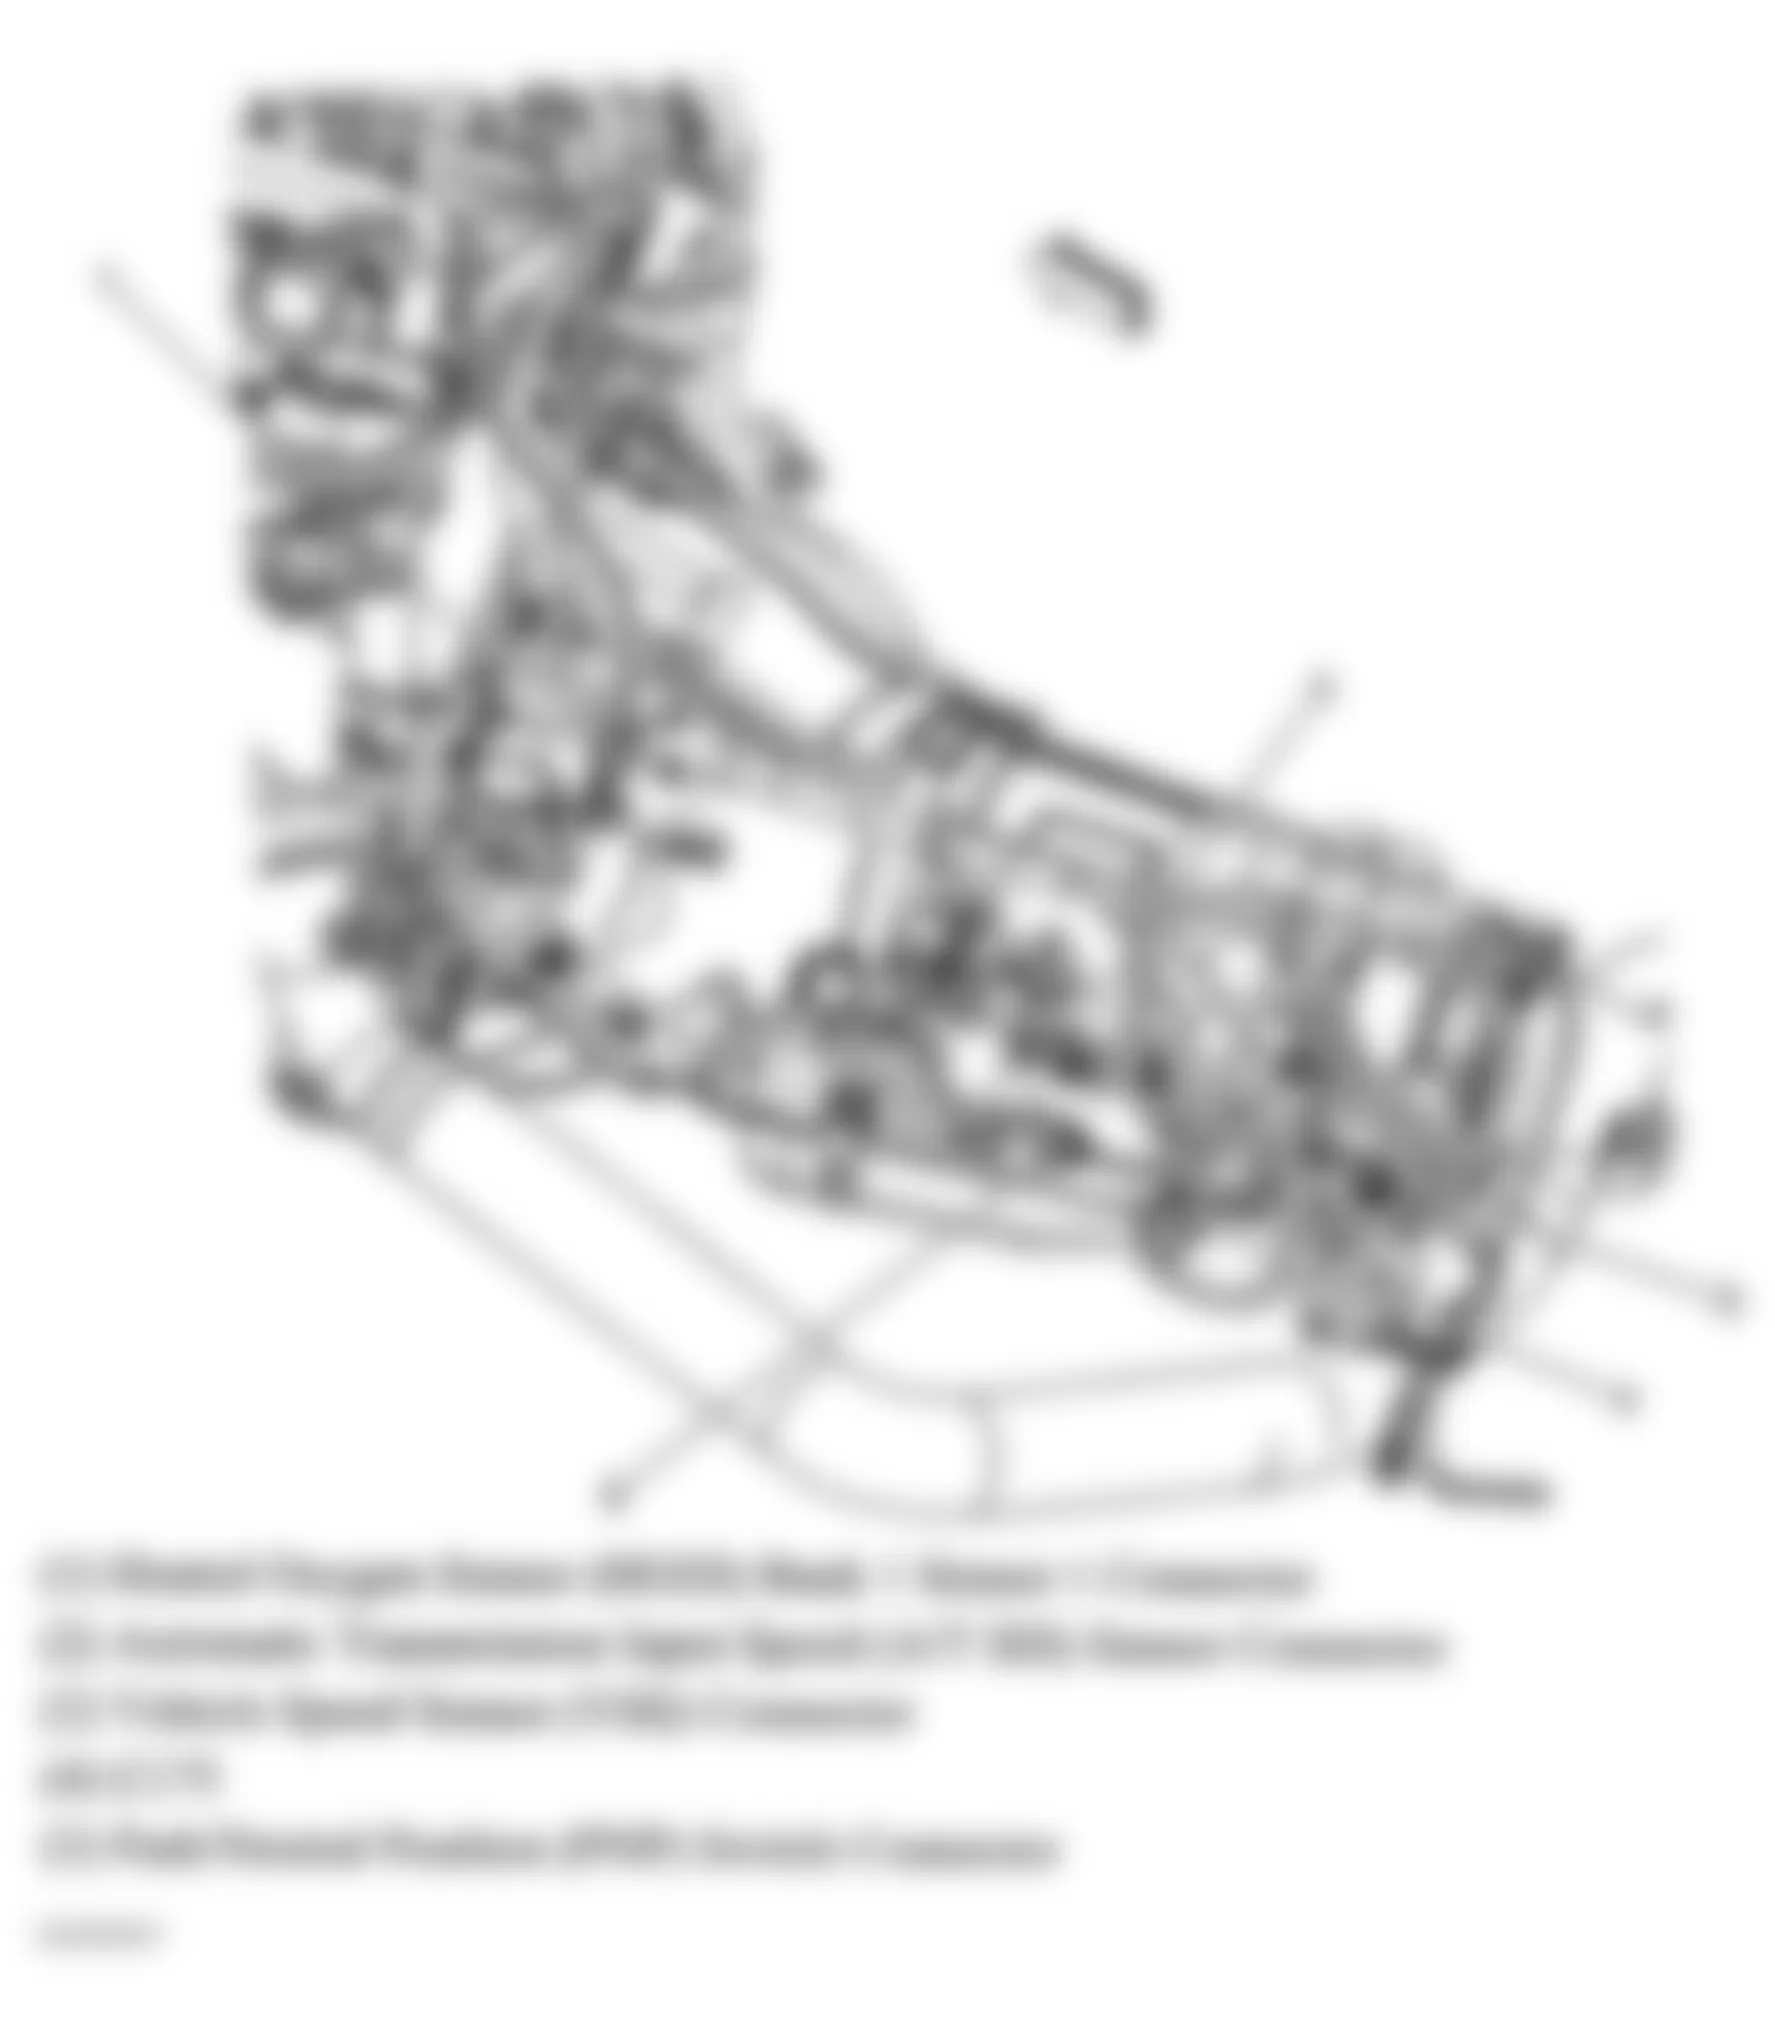 GMC Savana Special G3500 2007 - Component Locations -  Rear Of Engine & Transmission (4.8L & 6.0L)